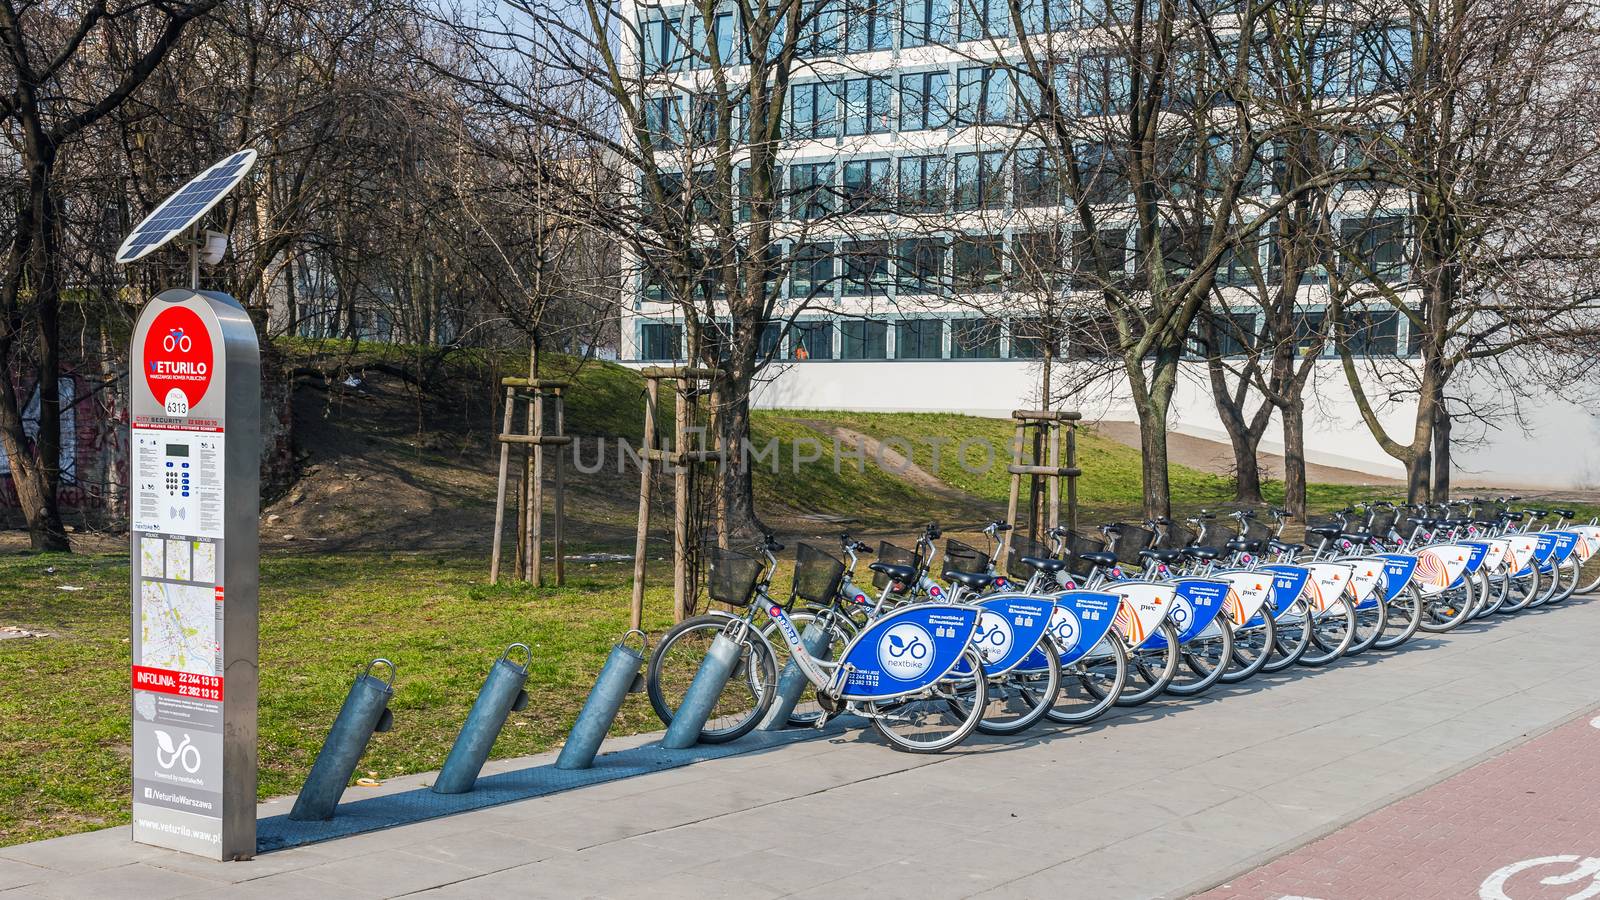 One of 198 bike stations  in Warsaw by Veturilo company that offers in total 2968 bikes for rental. Traversing the city on a bike is nowadays popular and fashionable.